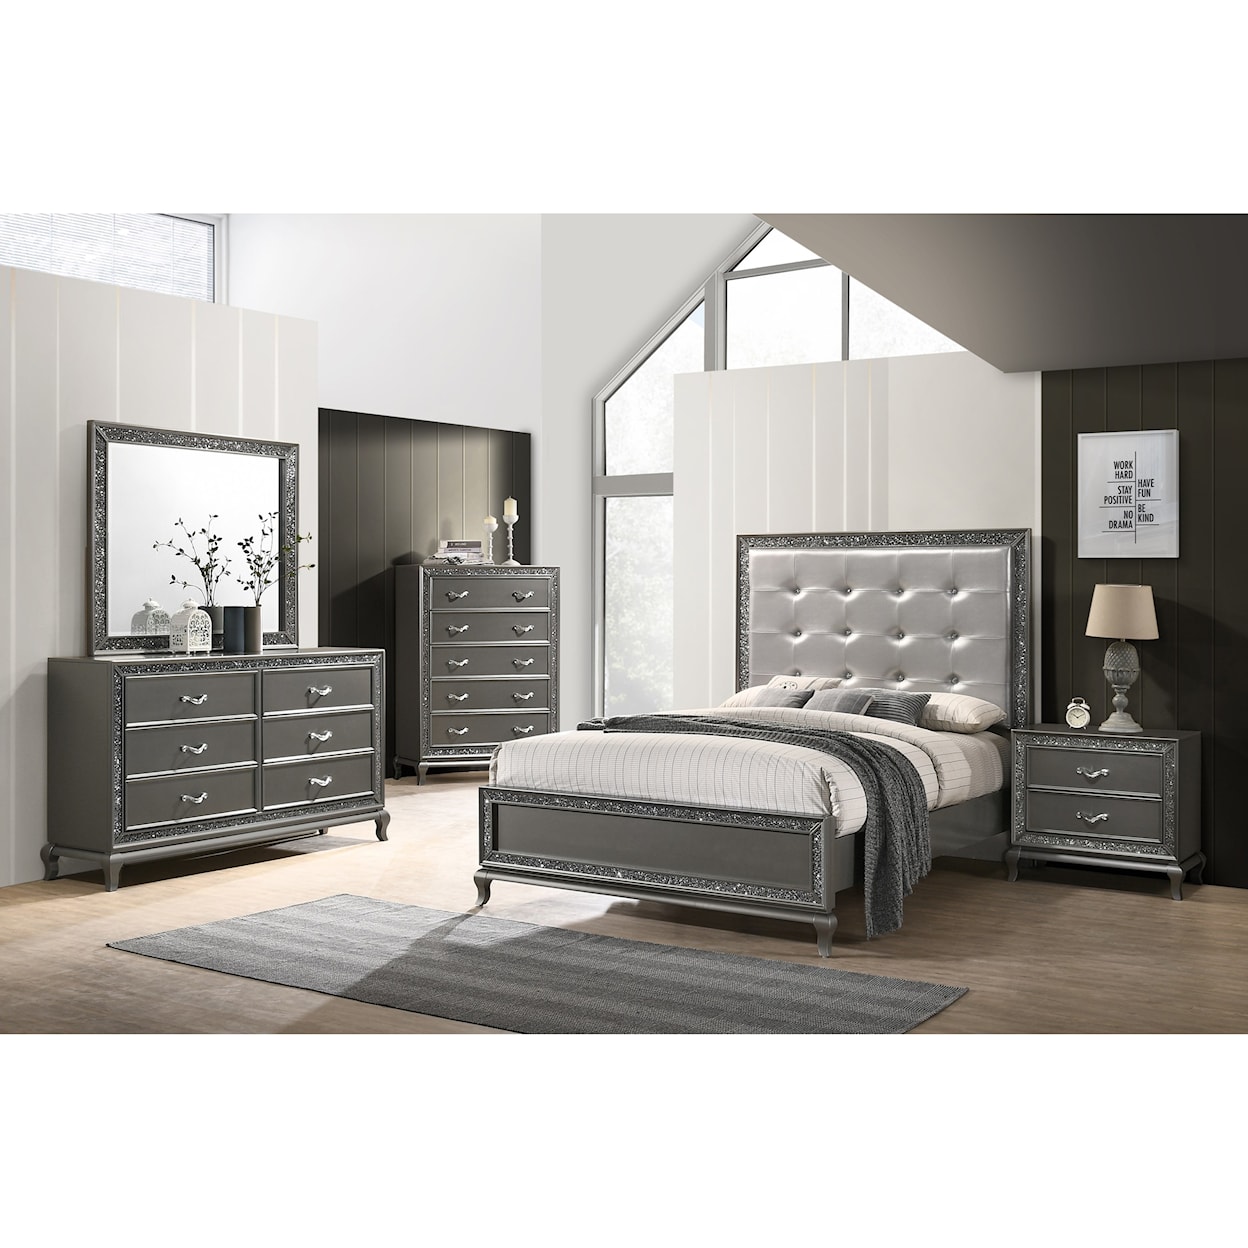 New Classic Park Imperial California King Bedroom Group